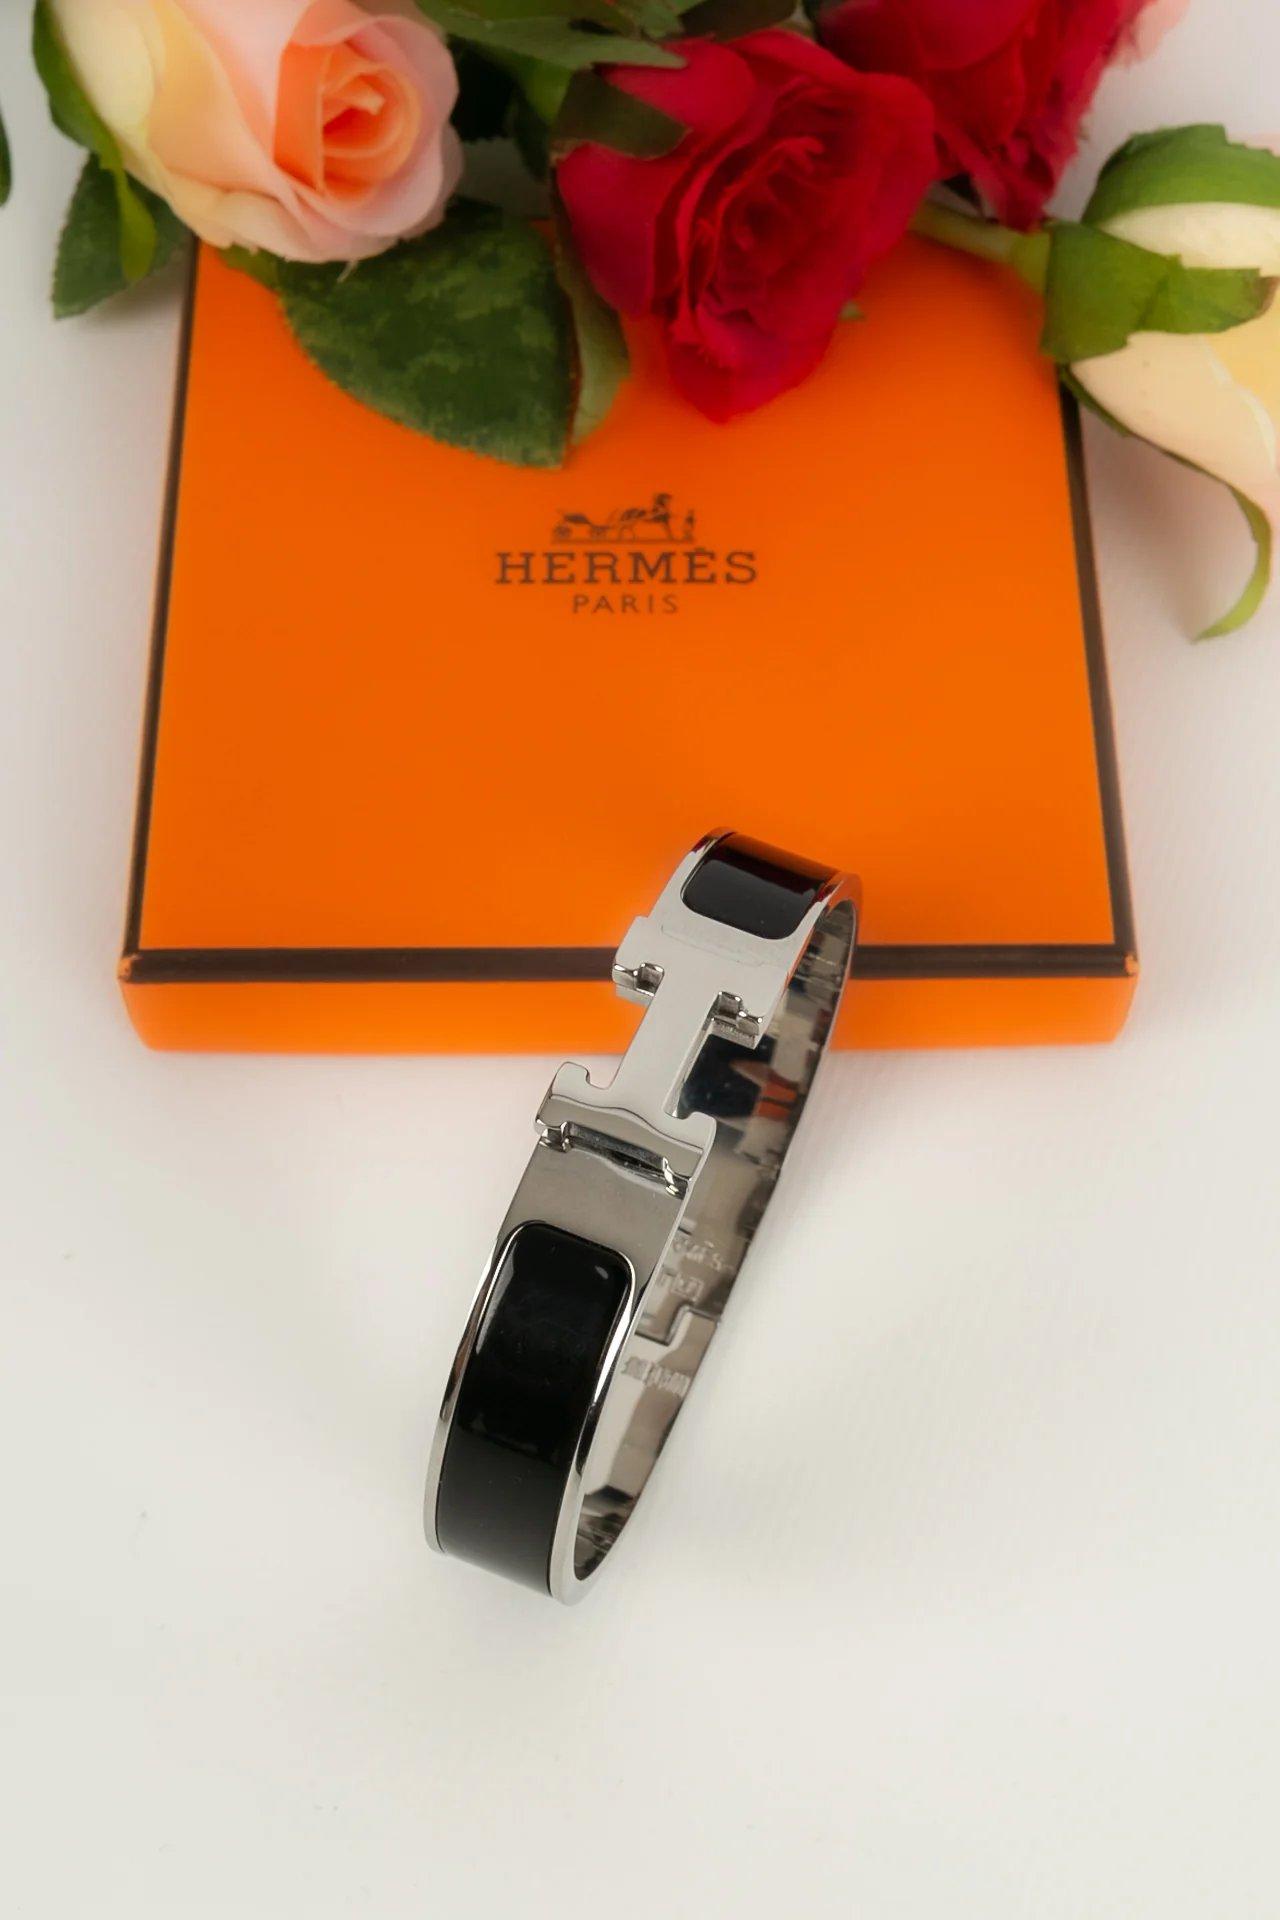 Hermès - (Made in France) Silver plated metal and black enamel bracelet.

Additional information:

Dimensions: 
Wrist size: 17 cm 
Opening: 9 cm

Condition: 
Very good condition

Seller Ref number: BRA131